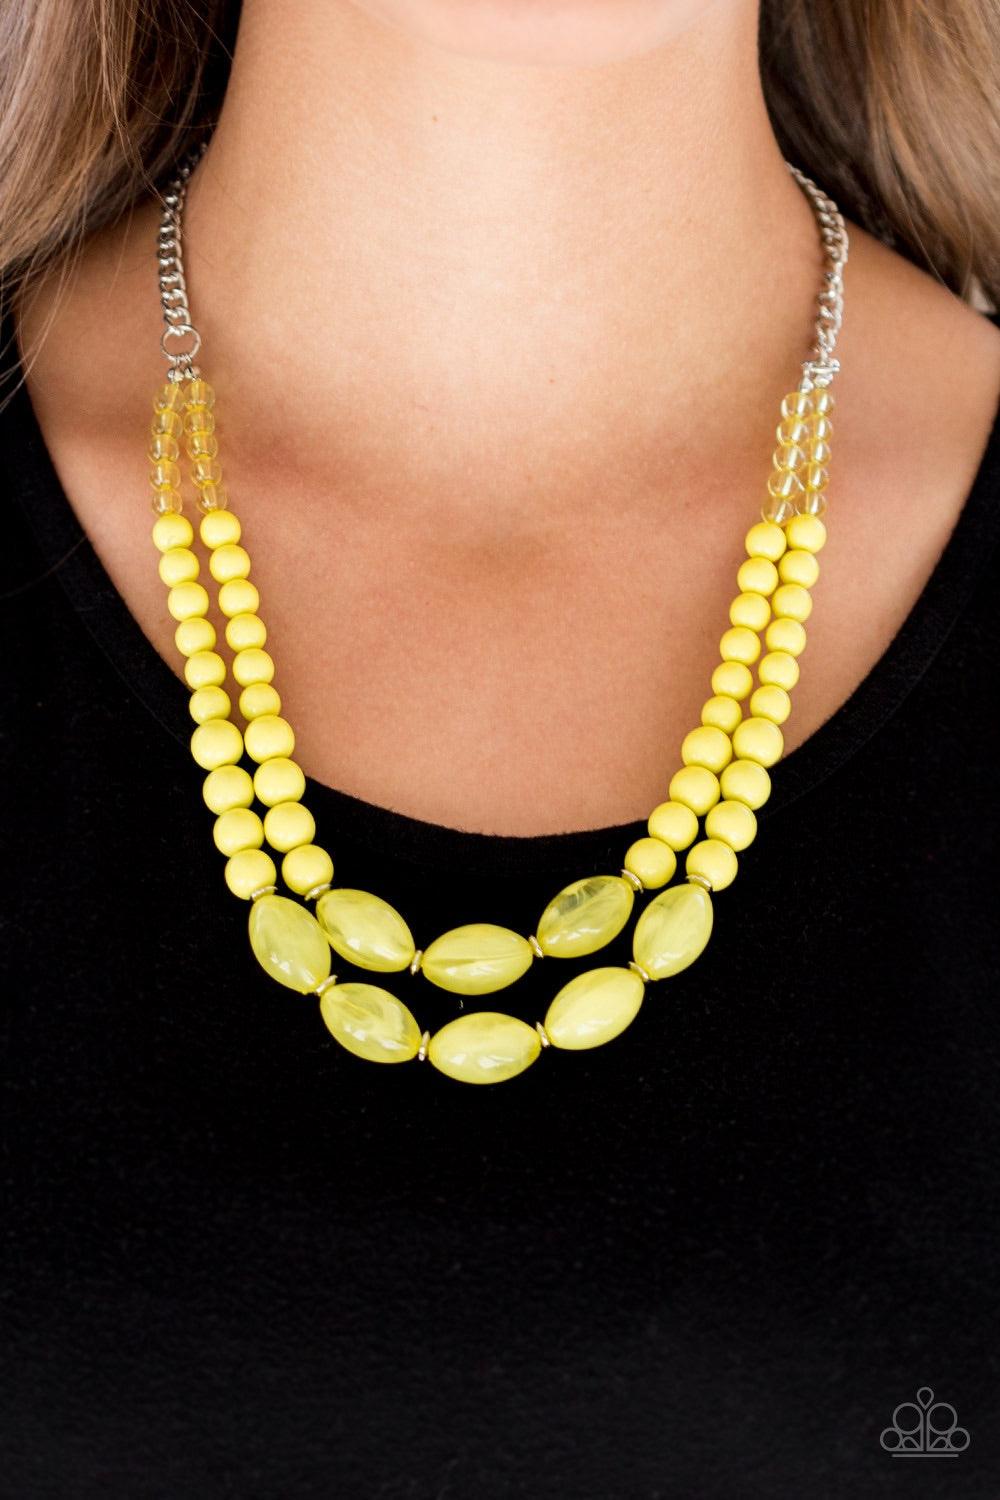 Paparazzi Accessories Sundae Shoppe - Yellow A collection of glassy, polished, and cloudy yellow beads are threaded along two invisible wires below the collar for a beautiful pop of color. Features an adjustable clasp closure. Jewelry